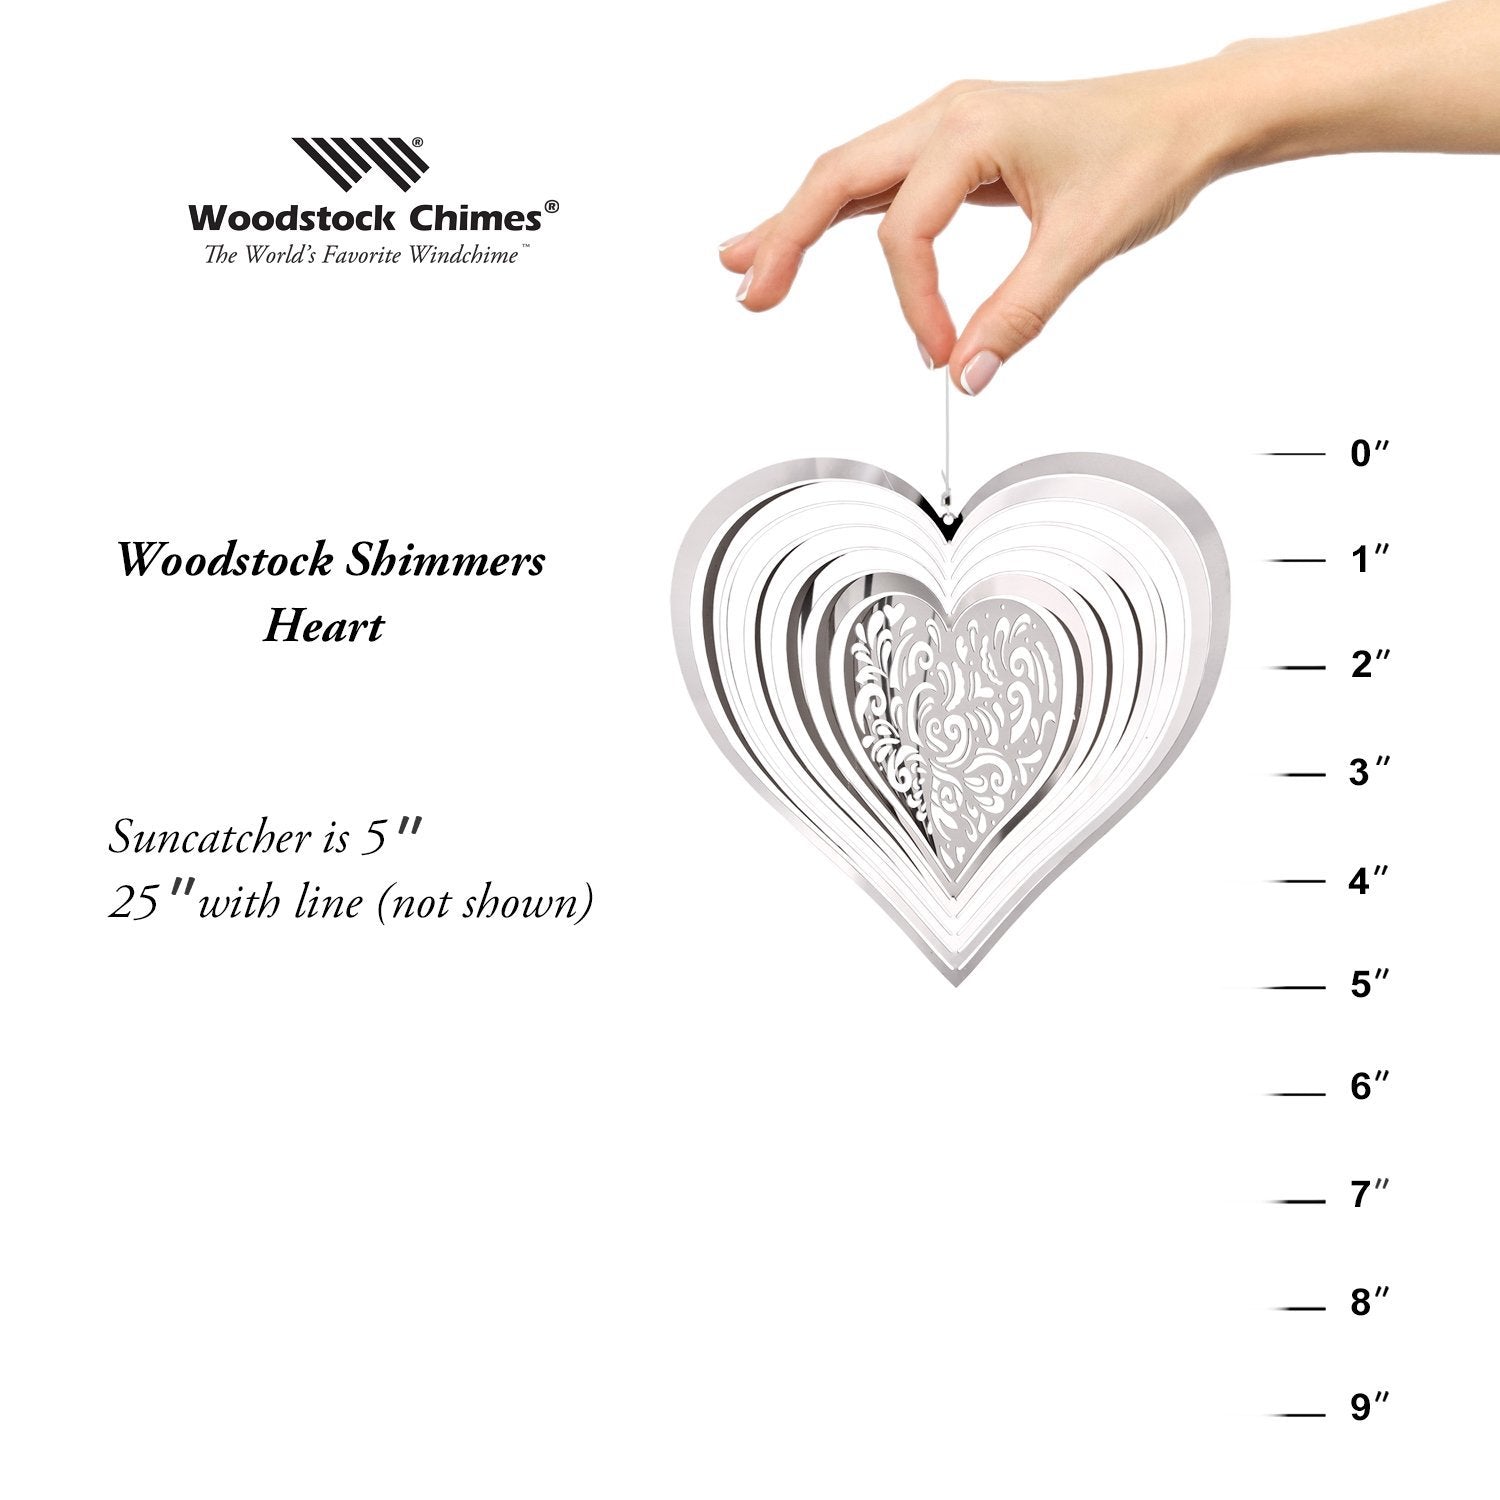 Shimmers - Heart proportion image